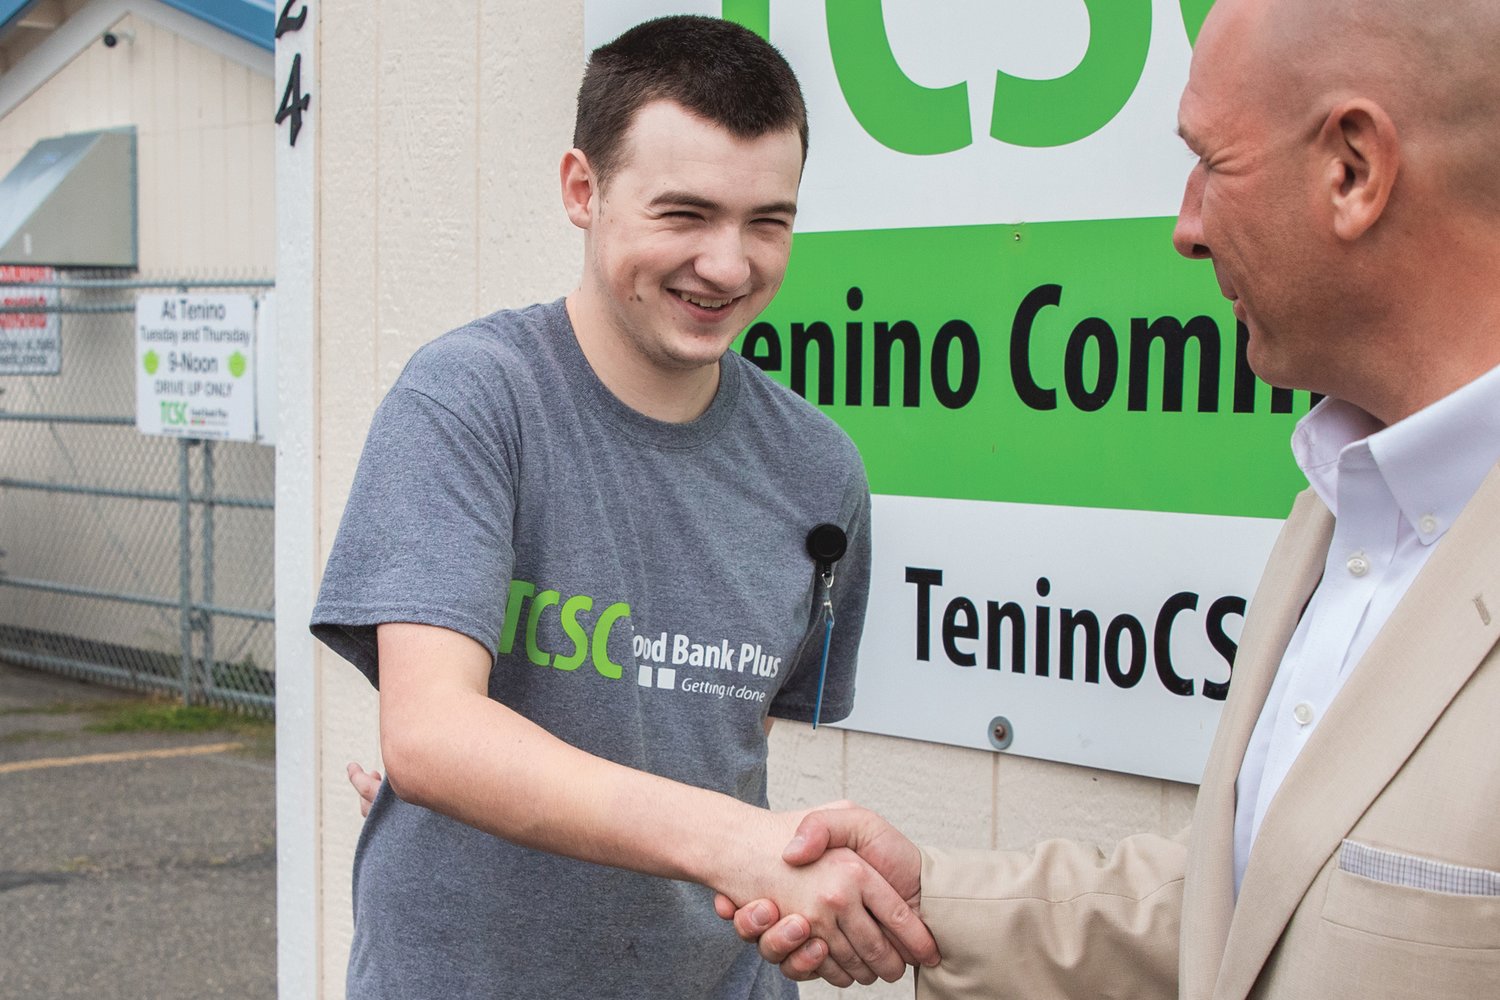 State Rep. Peter Abbarno, right, shakes the hand of Korbin Pearson, 21, a Tenino graduate with special needs who works at the location three days a week as part of a newly established program at Tenino Food Bank Plus.